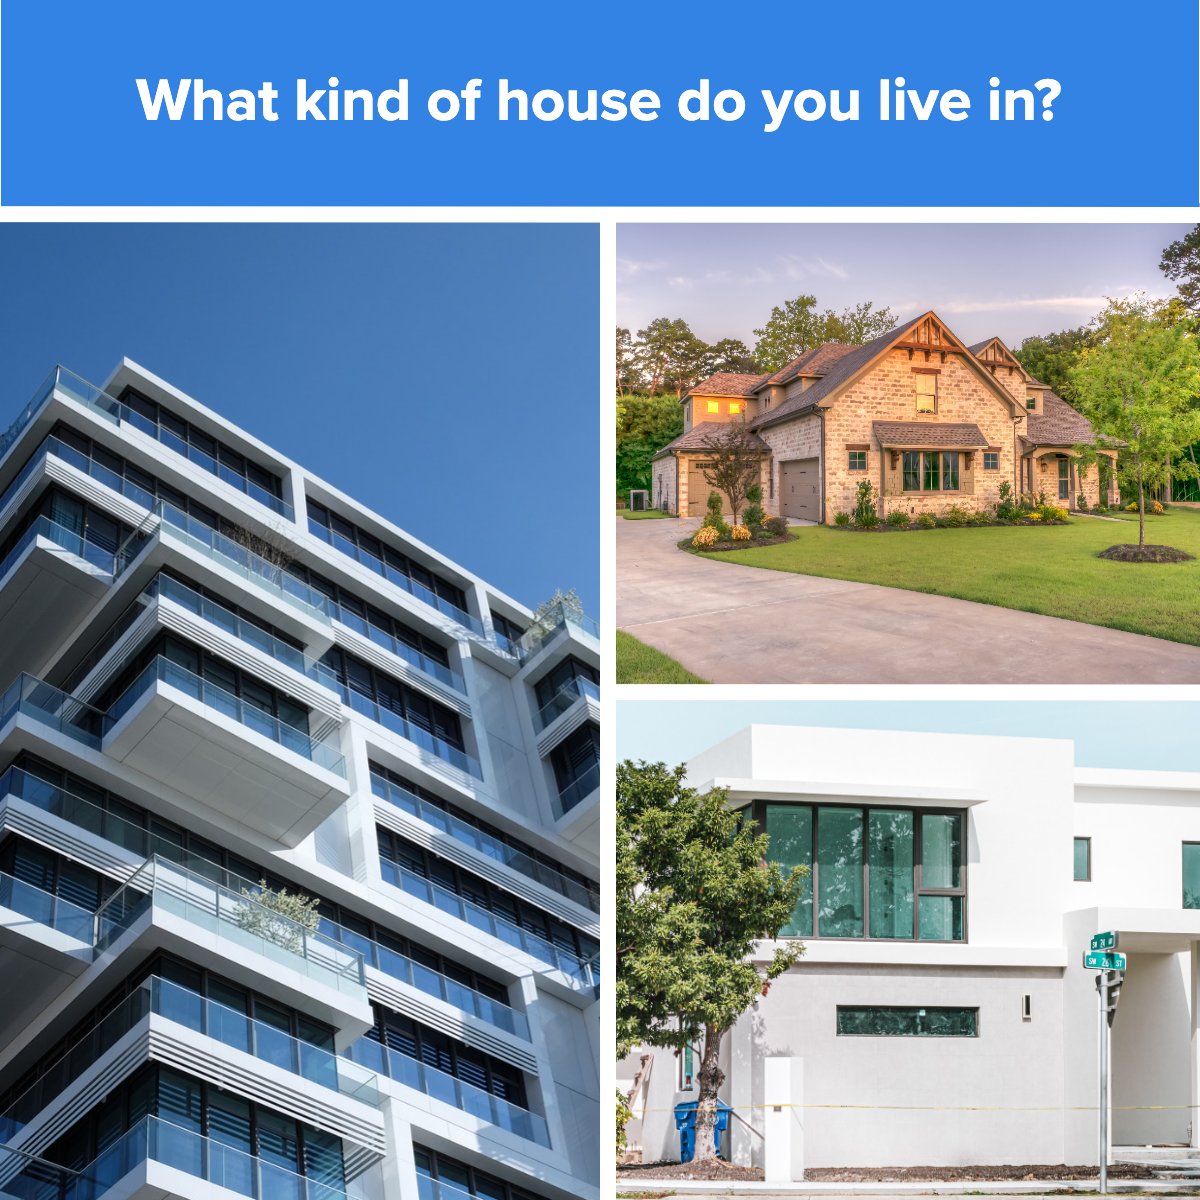 What kind of house do you live in? 🏡

#kindofhouse #housetype #realestate #question #singlefamilyhome #condo #townhouse